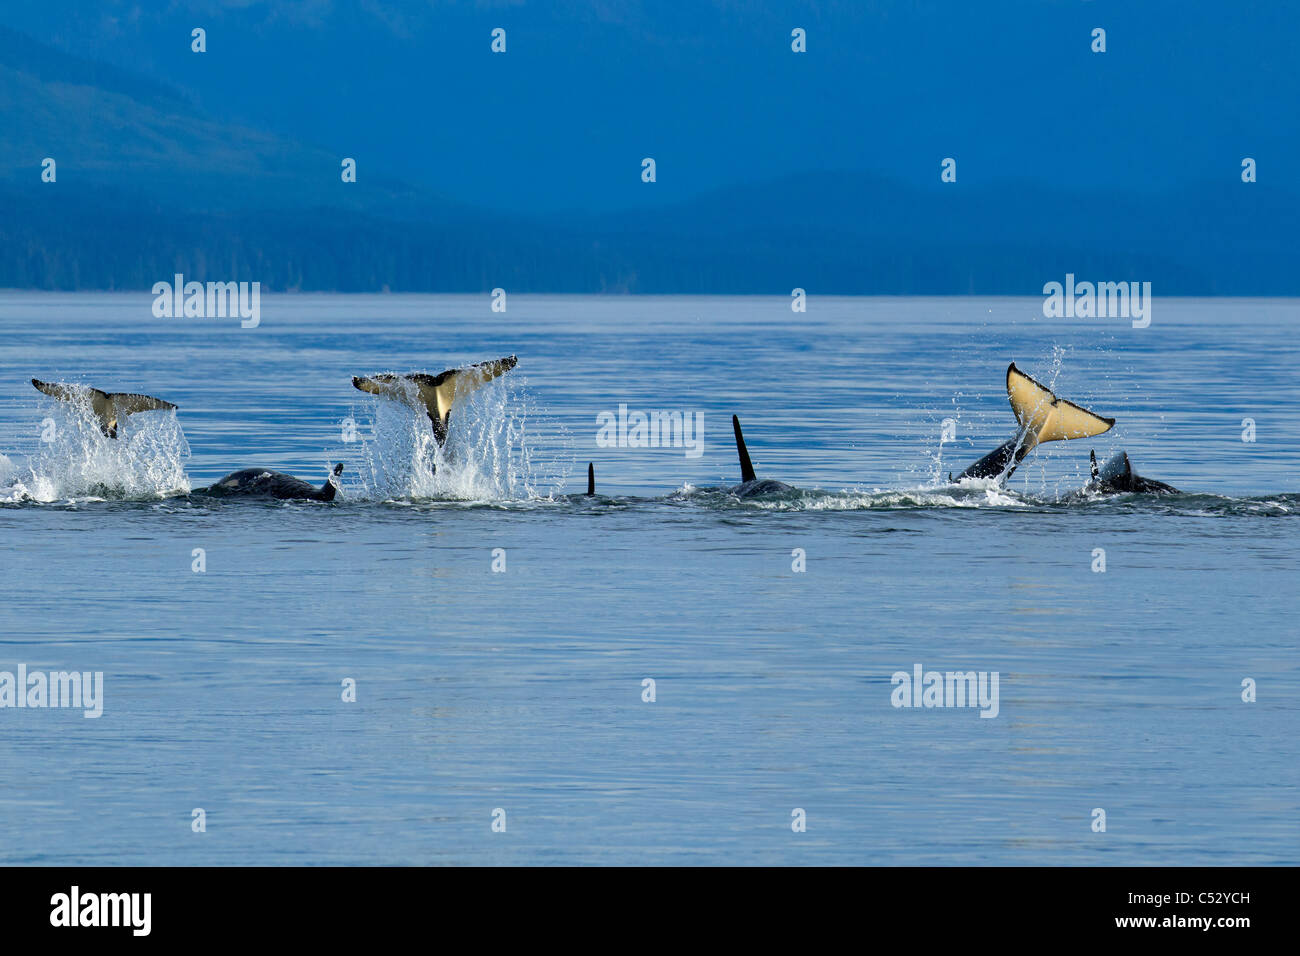 Orca whales playfully slap their tails at the surface in Chatham Strait, Inside Passage, Southeast Alaska, Summer Stock Photo